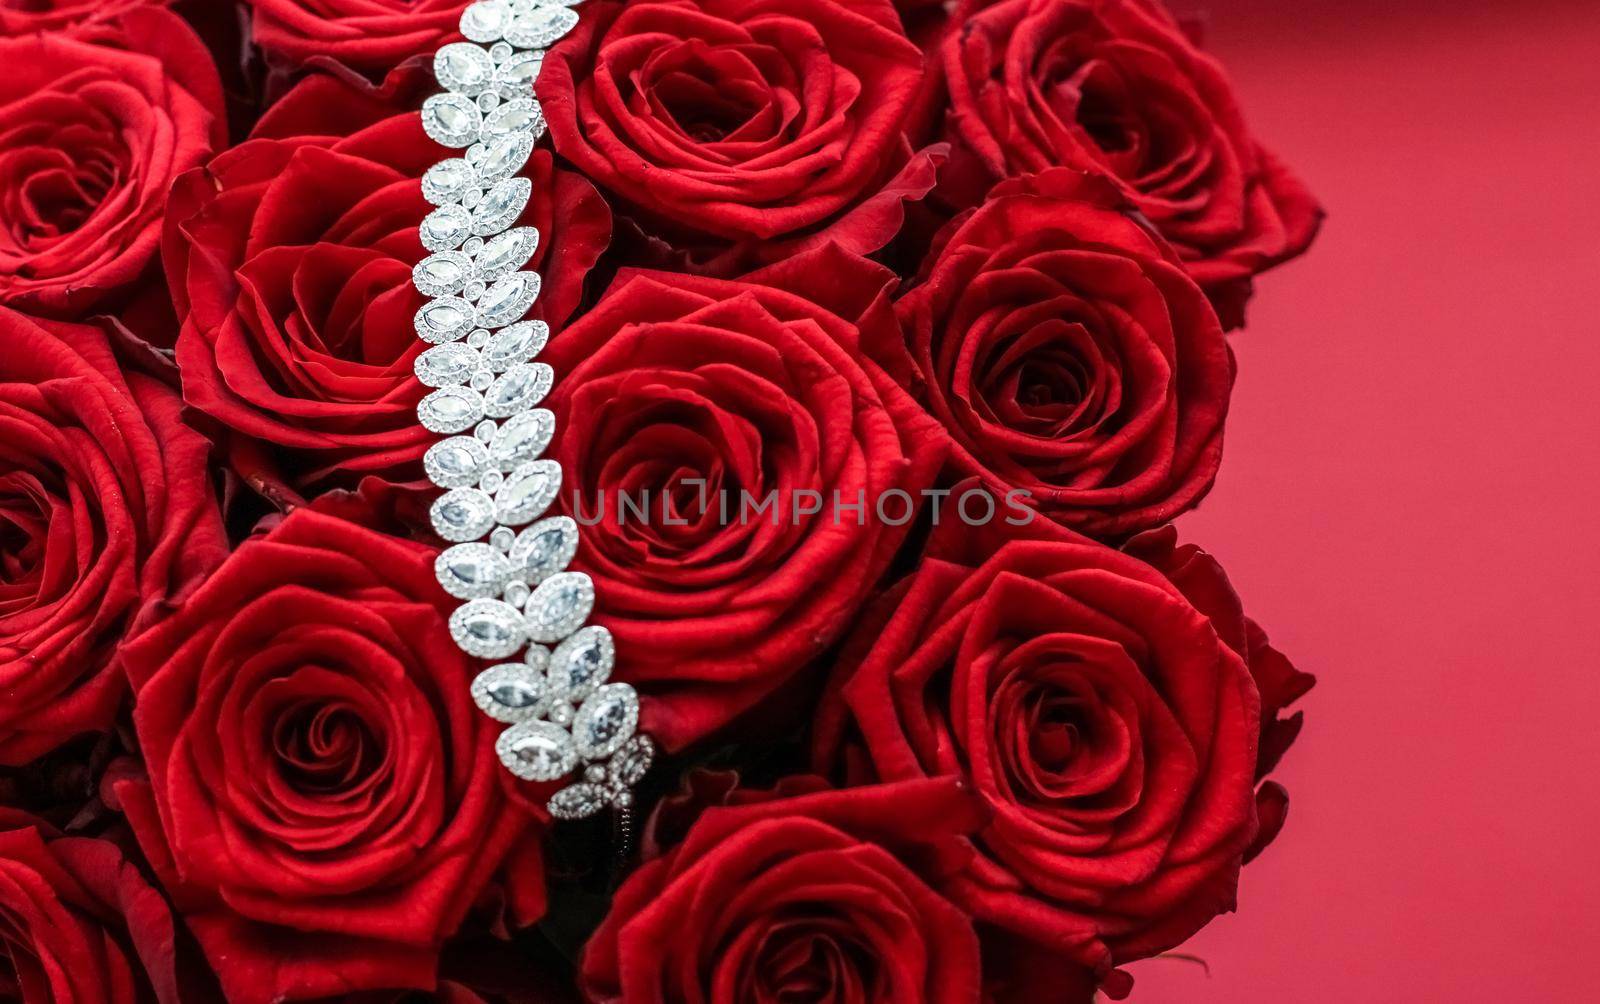 Luxury diamond bracelet and bouquet of red roses, jewelry love gift on Valentines Day and romantic holidays present by Anneleven